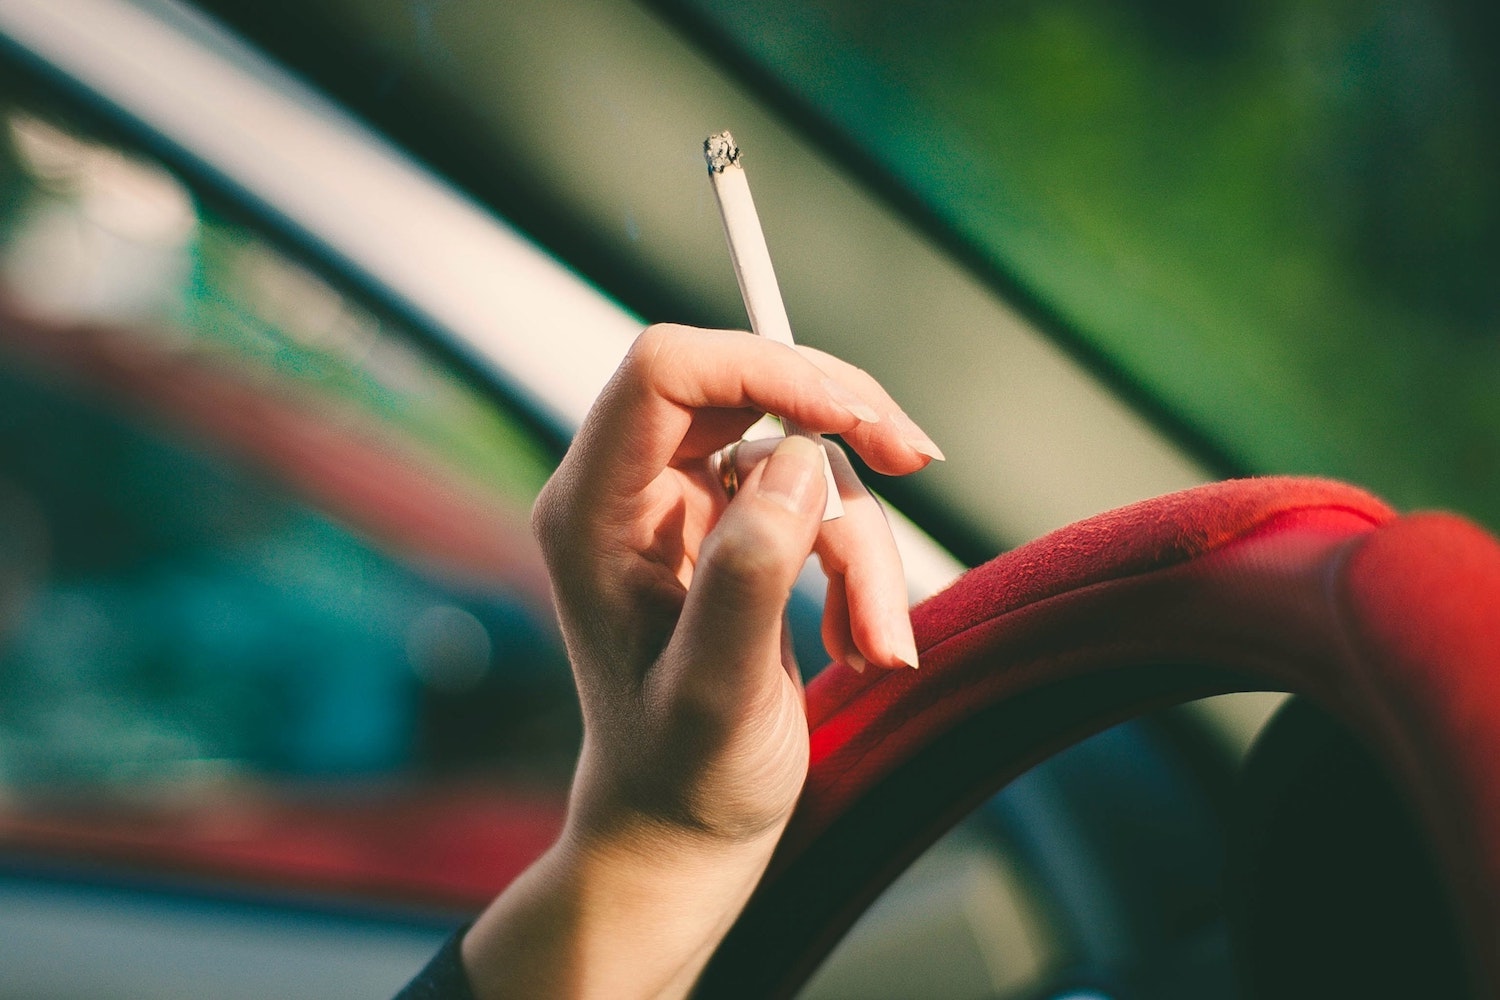 Closeup of a woman's hand holding a cigarette against the steering wheel of her car.